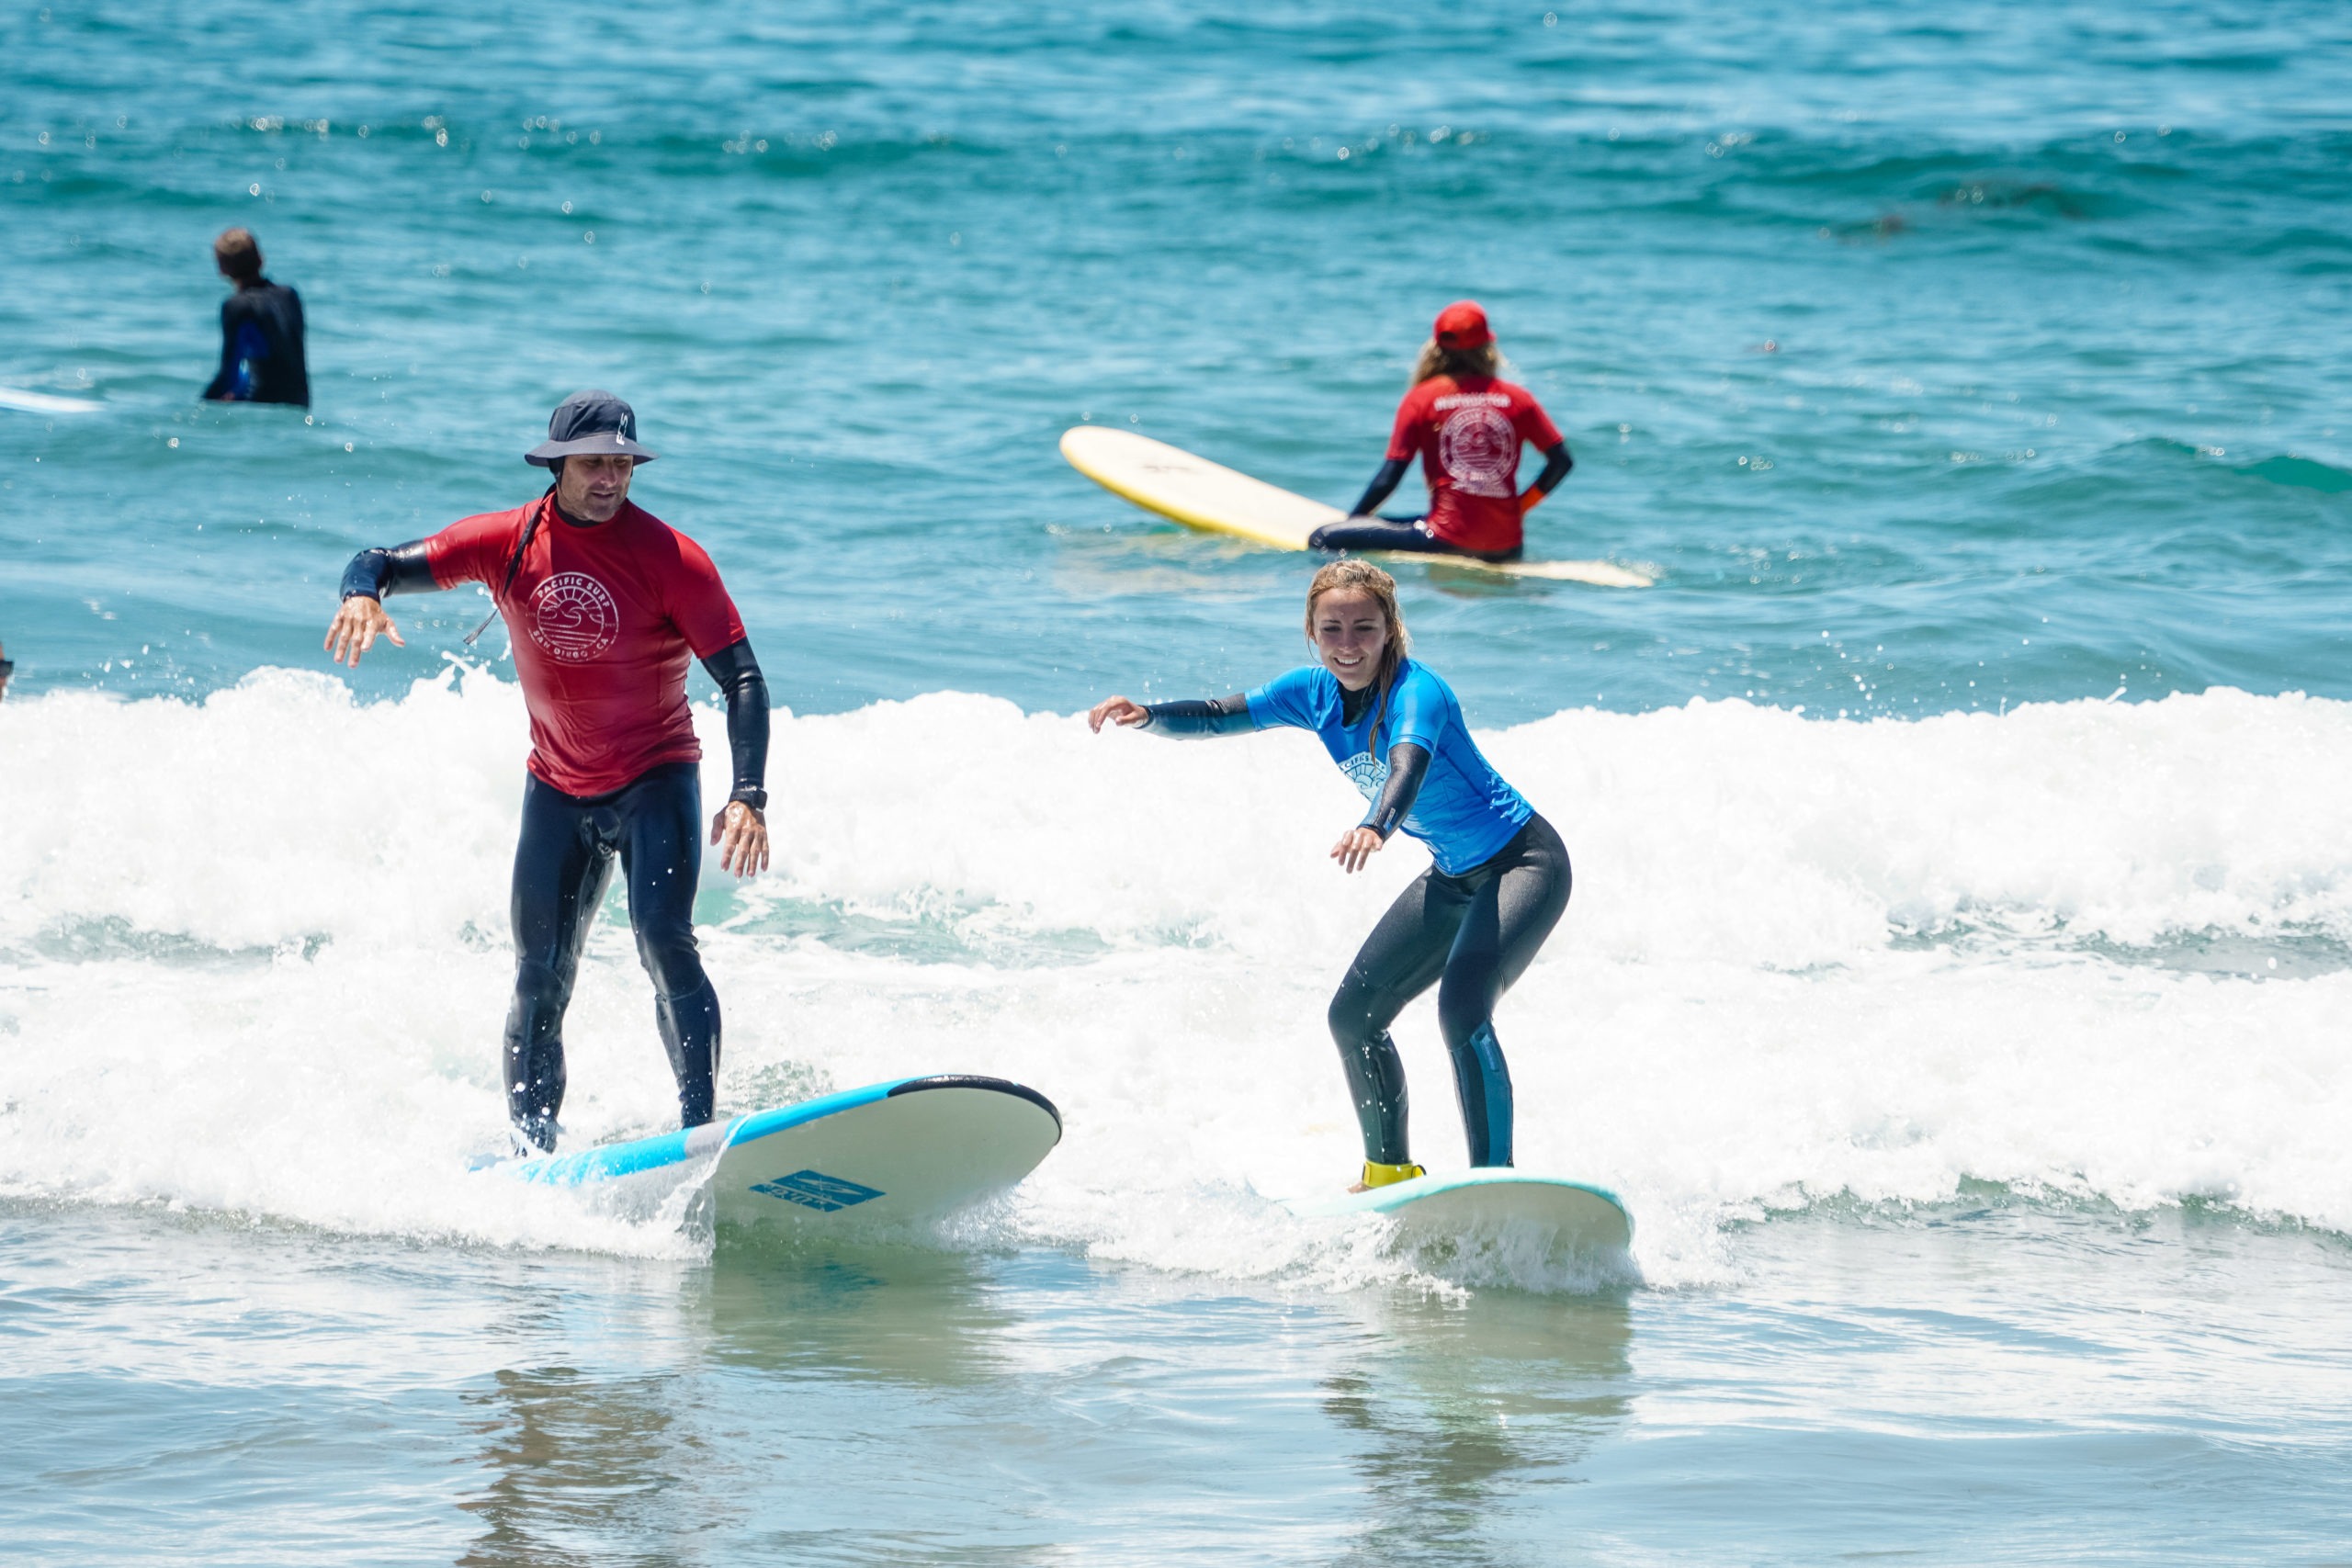 Surf instructor teaching a young kid how to surf.